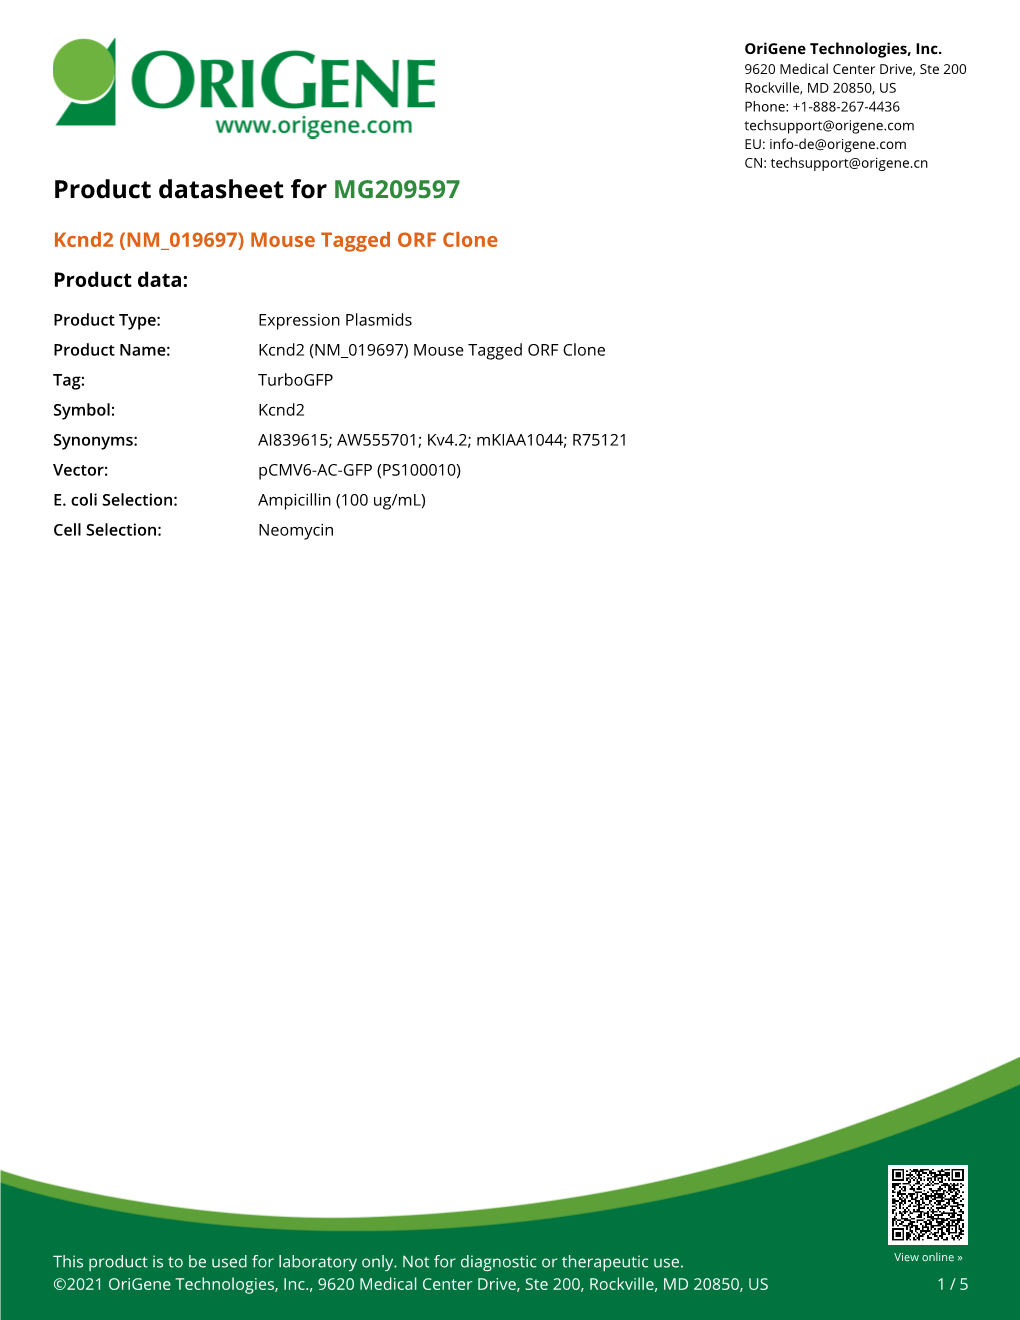 Kcnd2 (NM 019697) Mouse Tagged ORF Clone Product Data